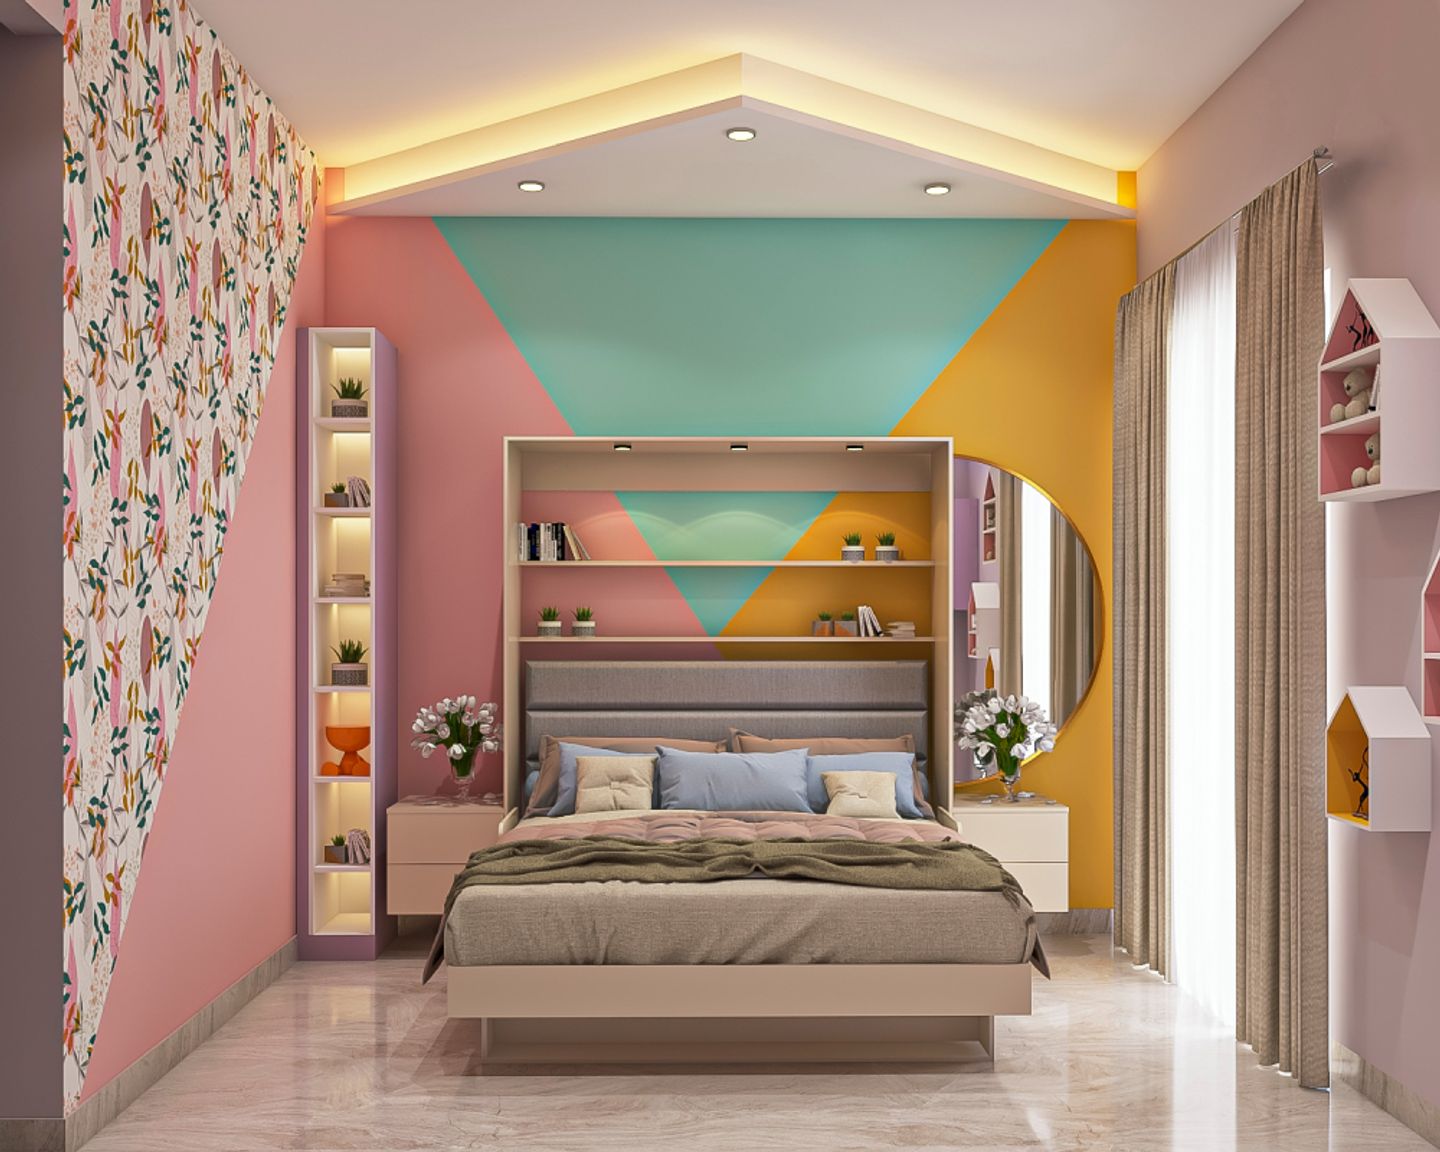 Kid's Bedroom With Foldable Bed - Livspace